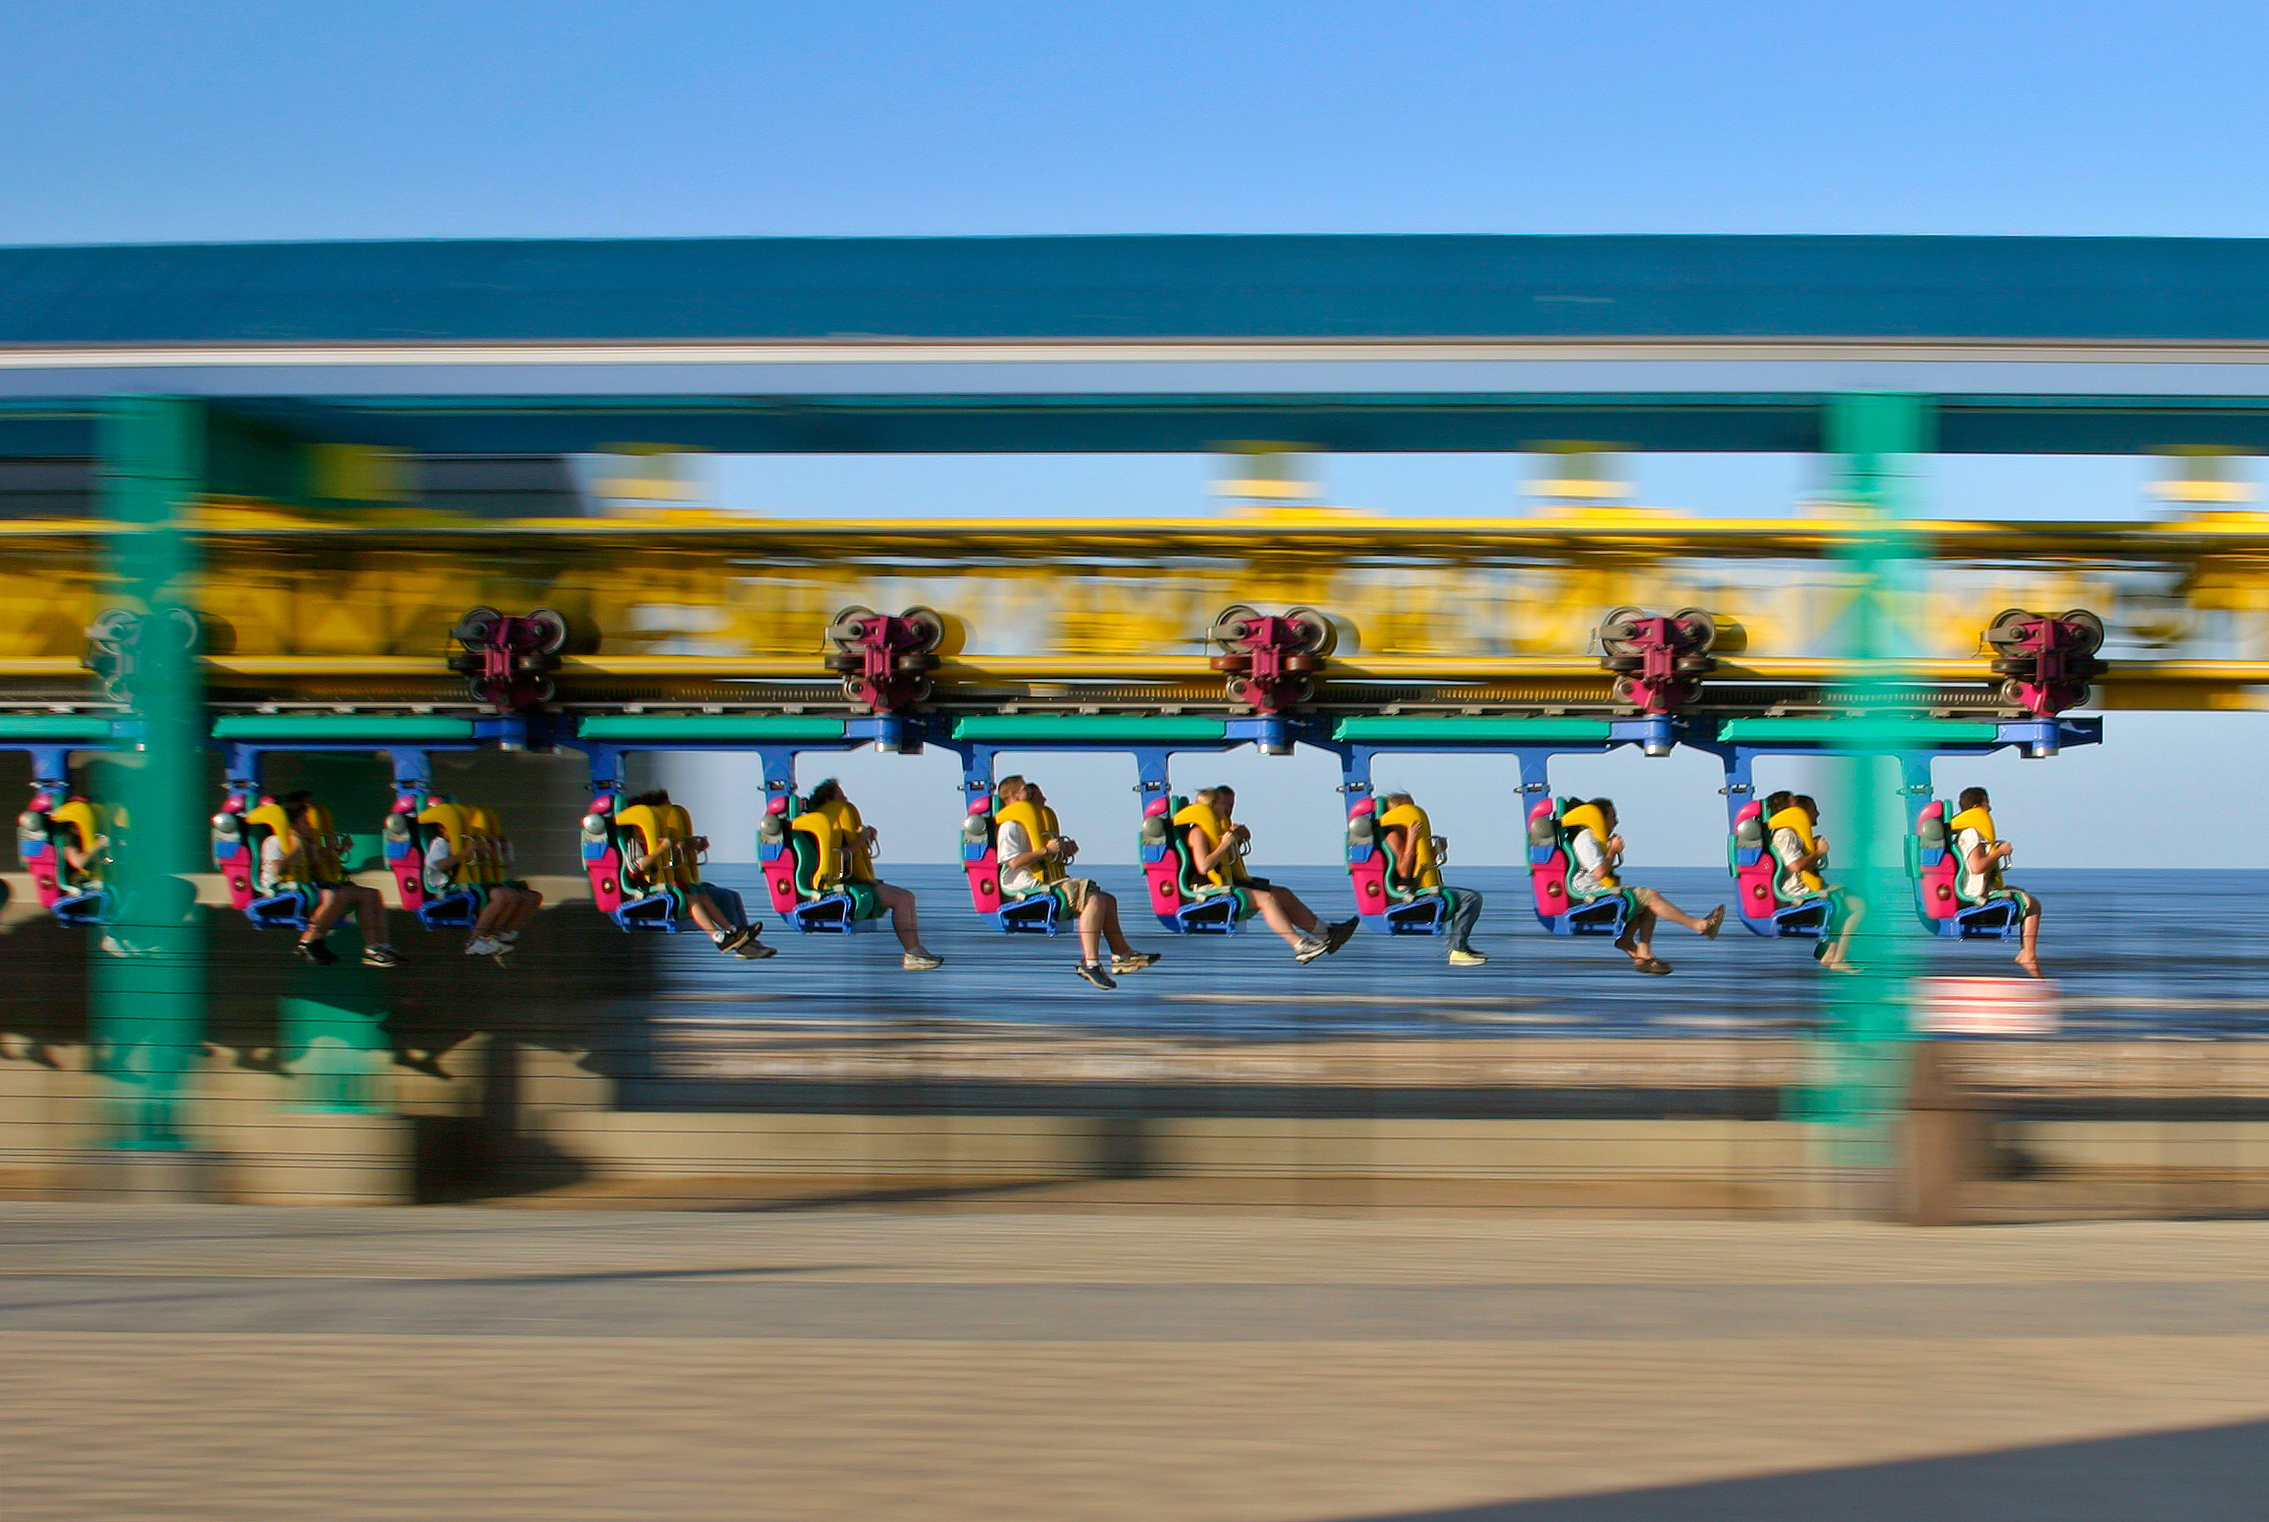 Riders on a fast roller coaster.